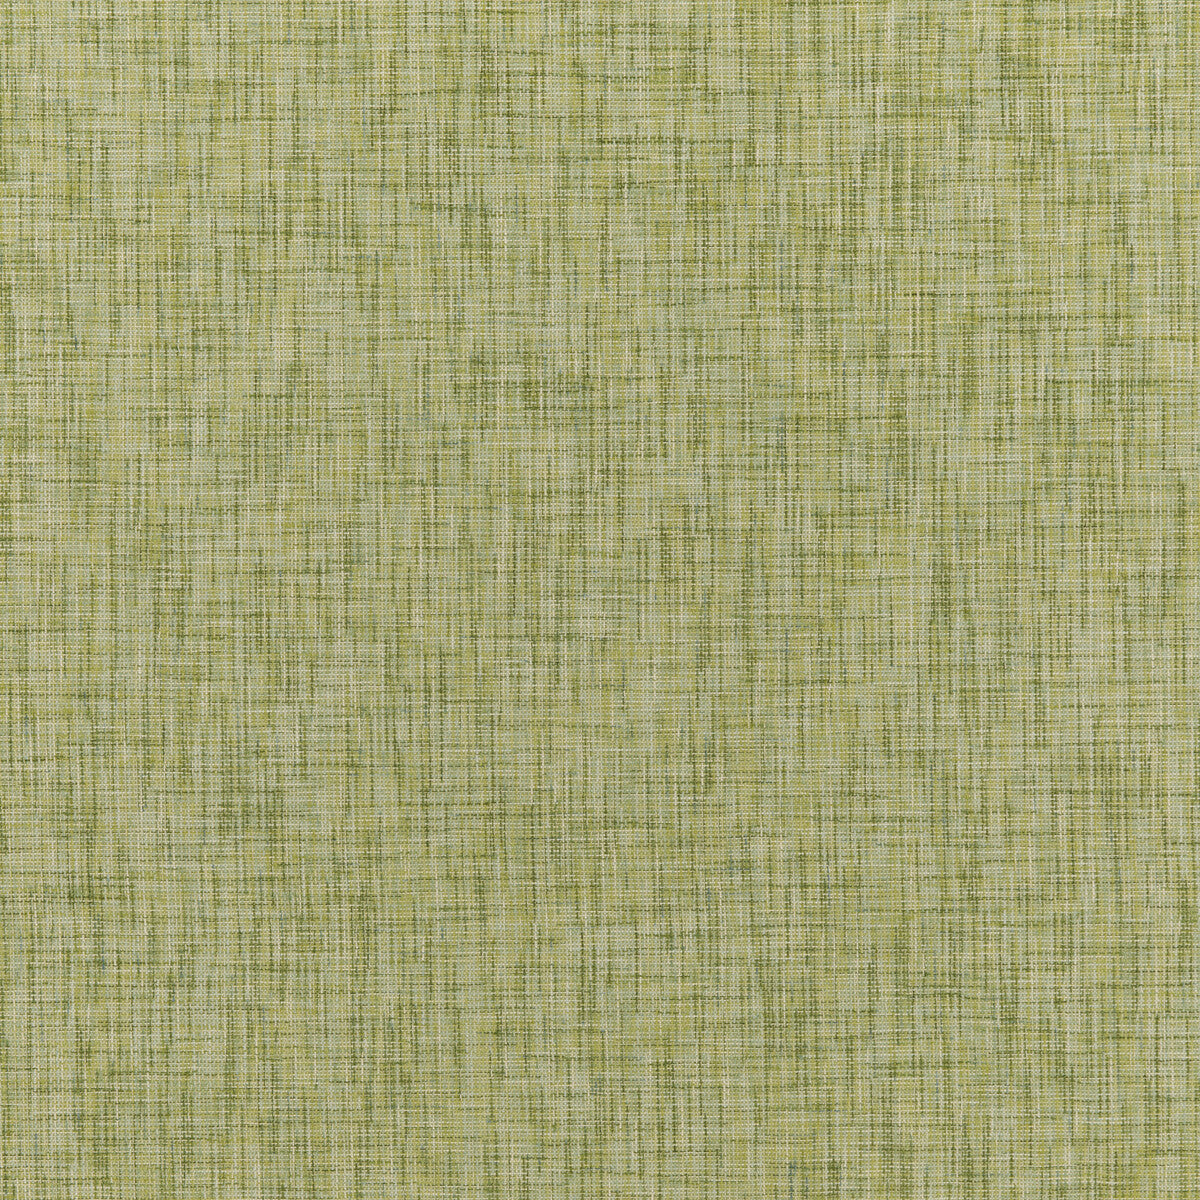 Temae Texture fabric in leaf color - pattern 8018107.3.0 - by Brunschwig &amp; Fils in the Baret collection